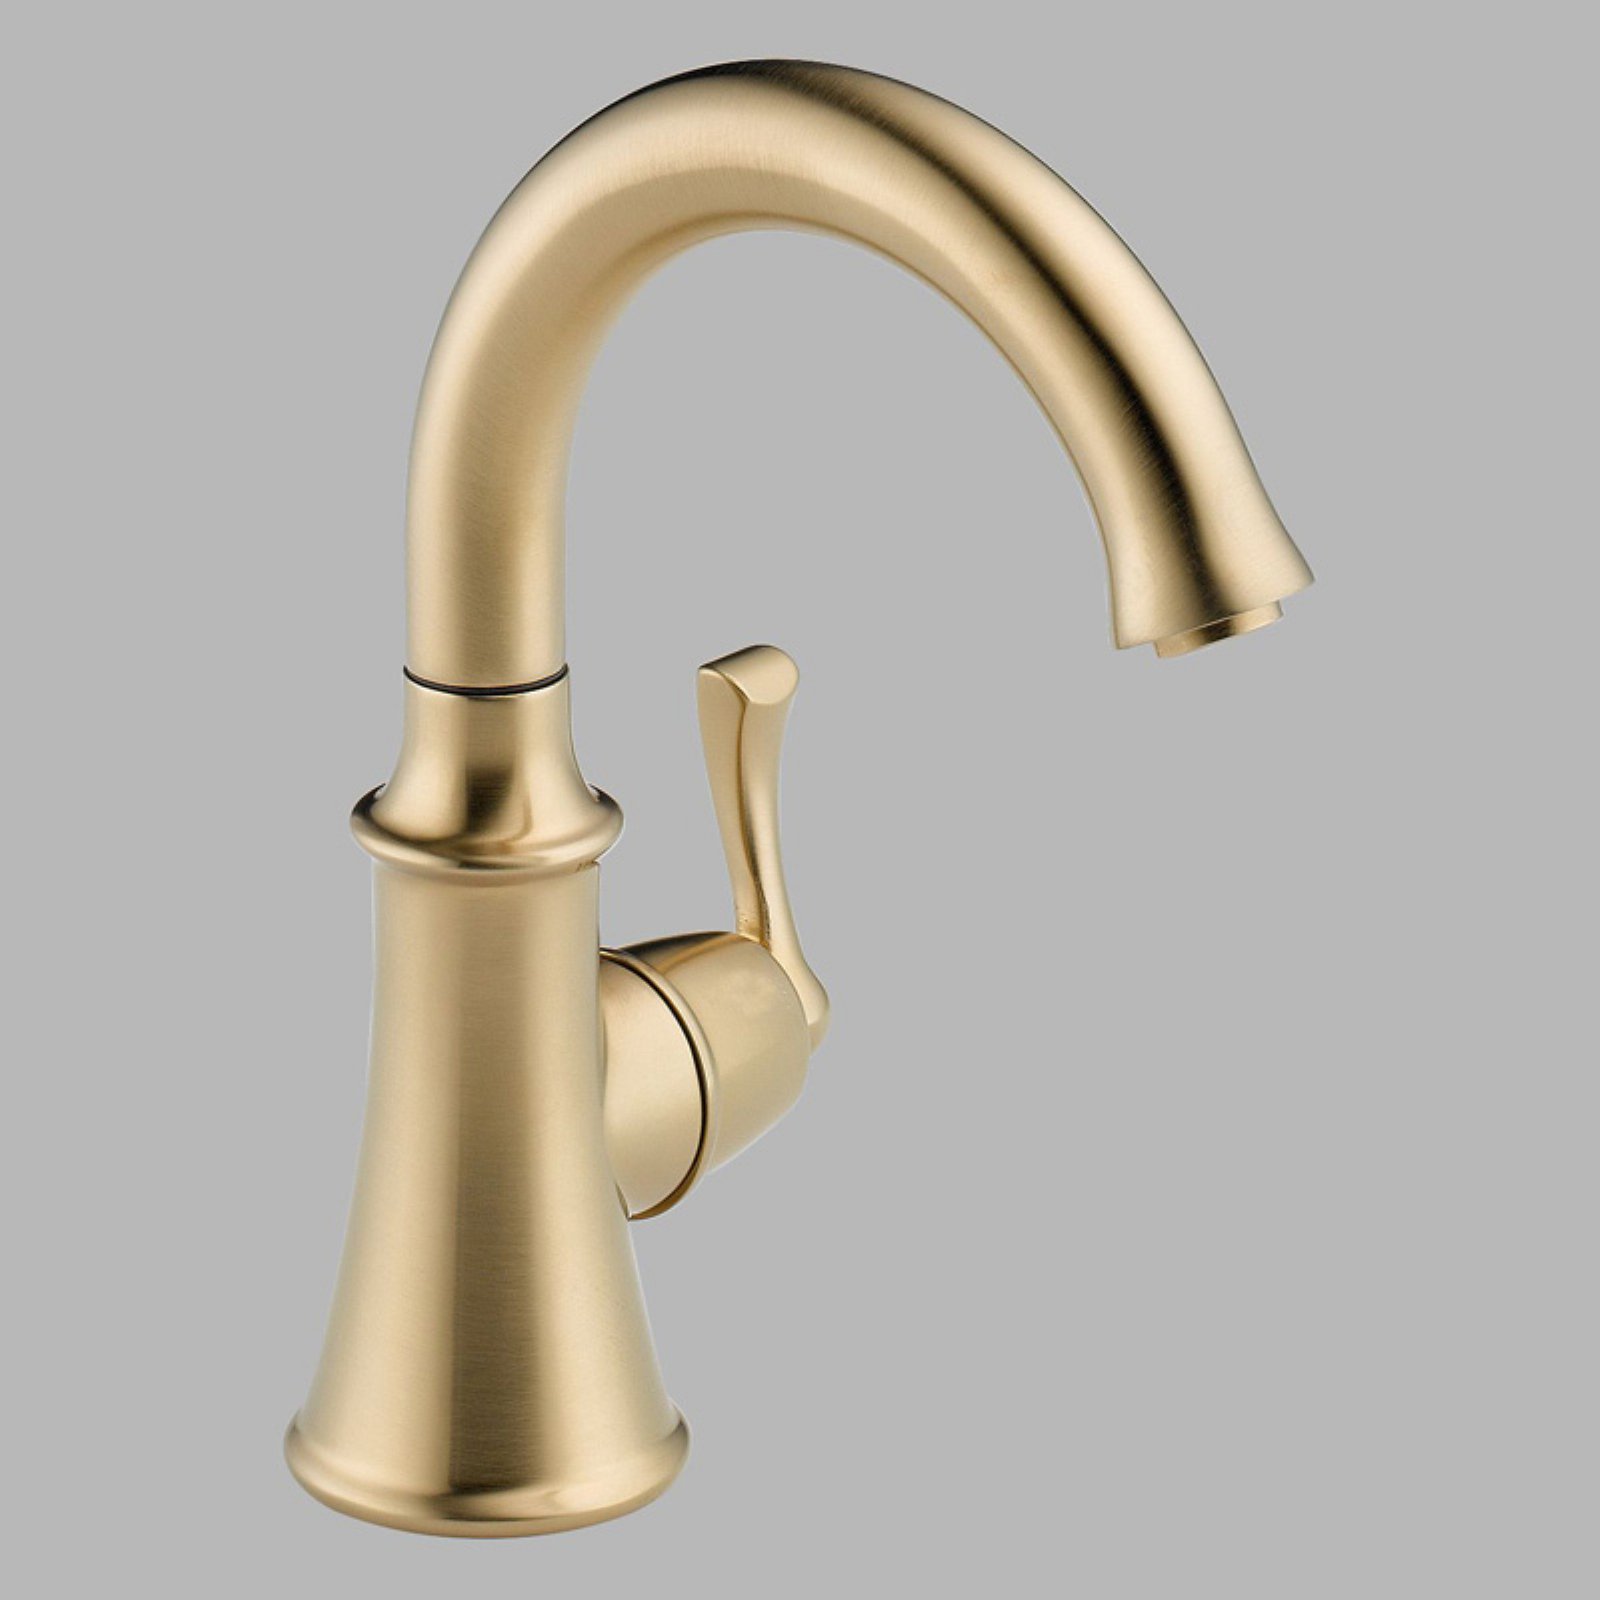 Delta Traditional Beverage Faucet, Champagne Bronze